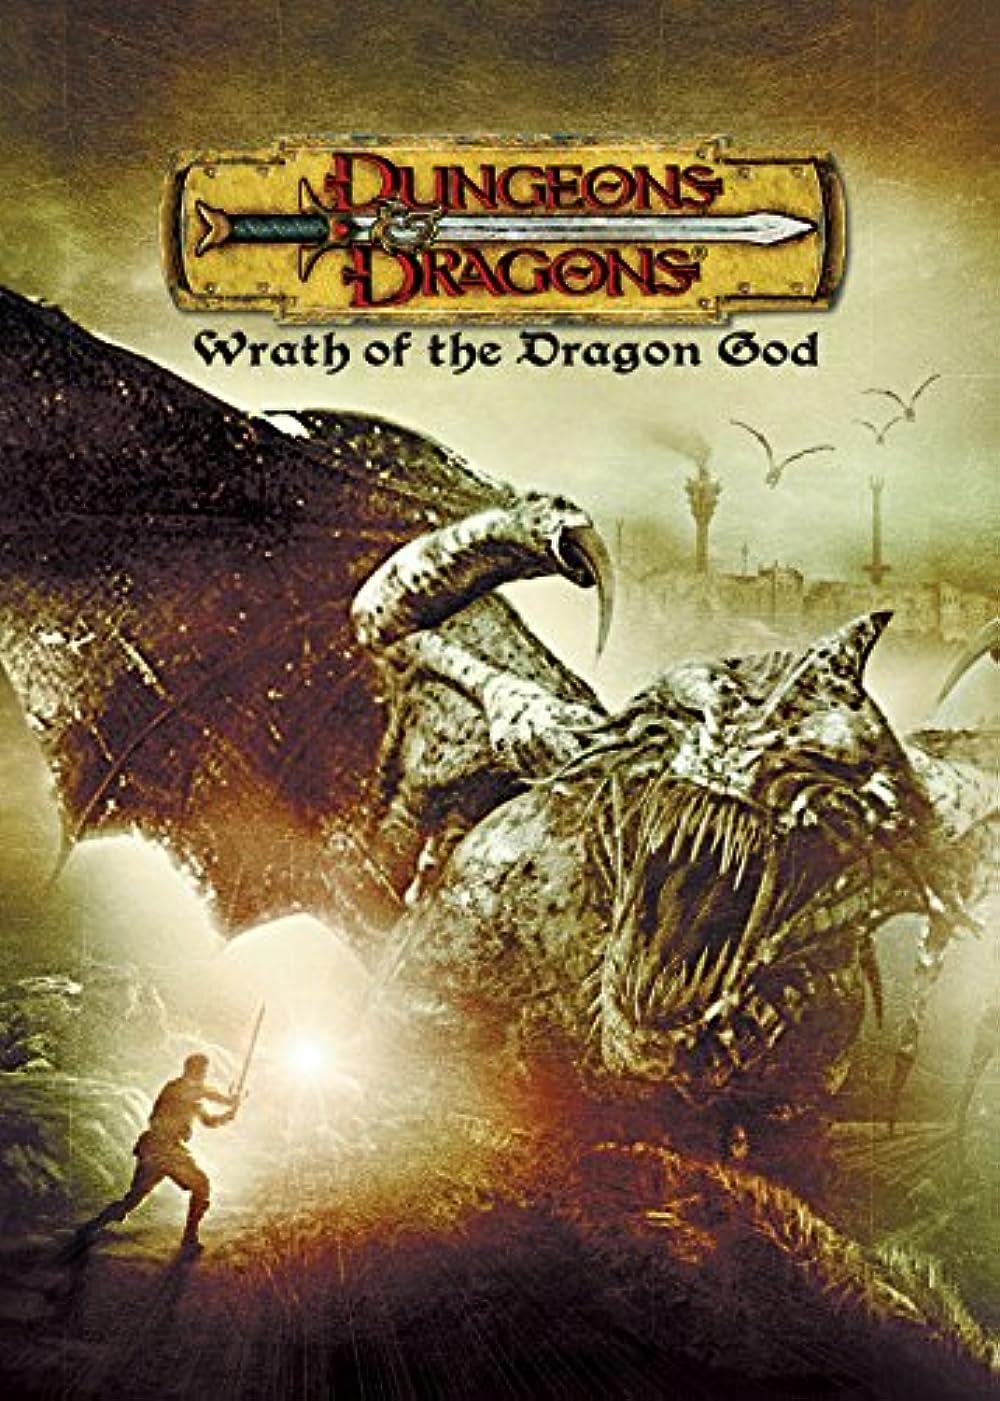 FULL MOVIE: Dungeons and Dragons: Wrath of the Dragon God (2005)